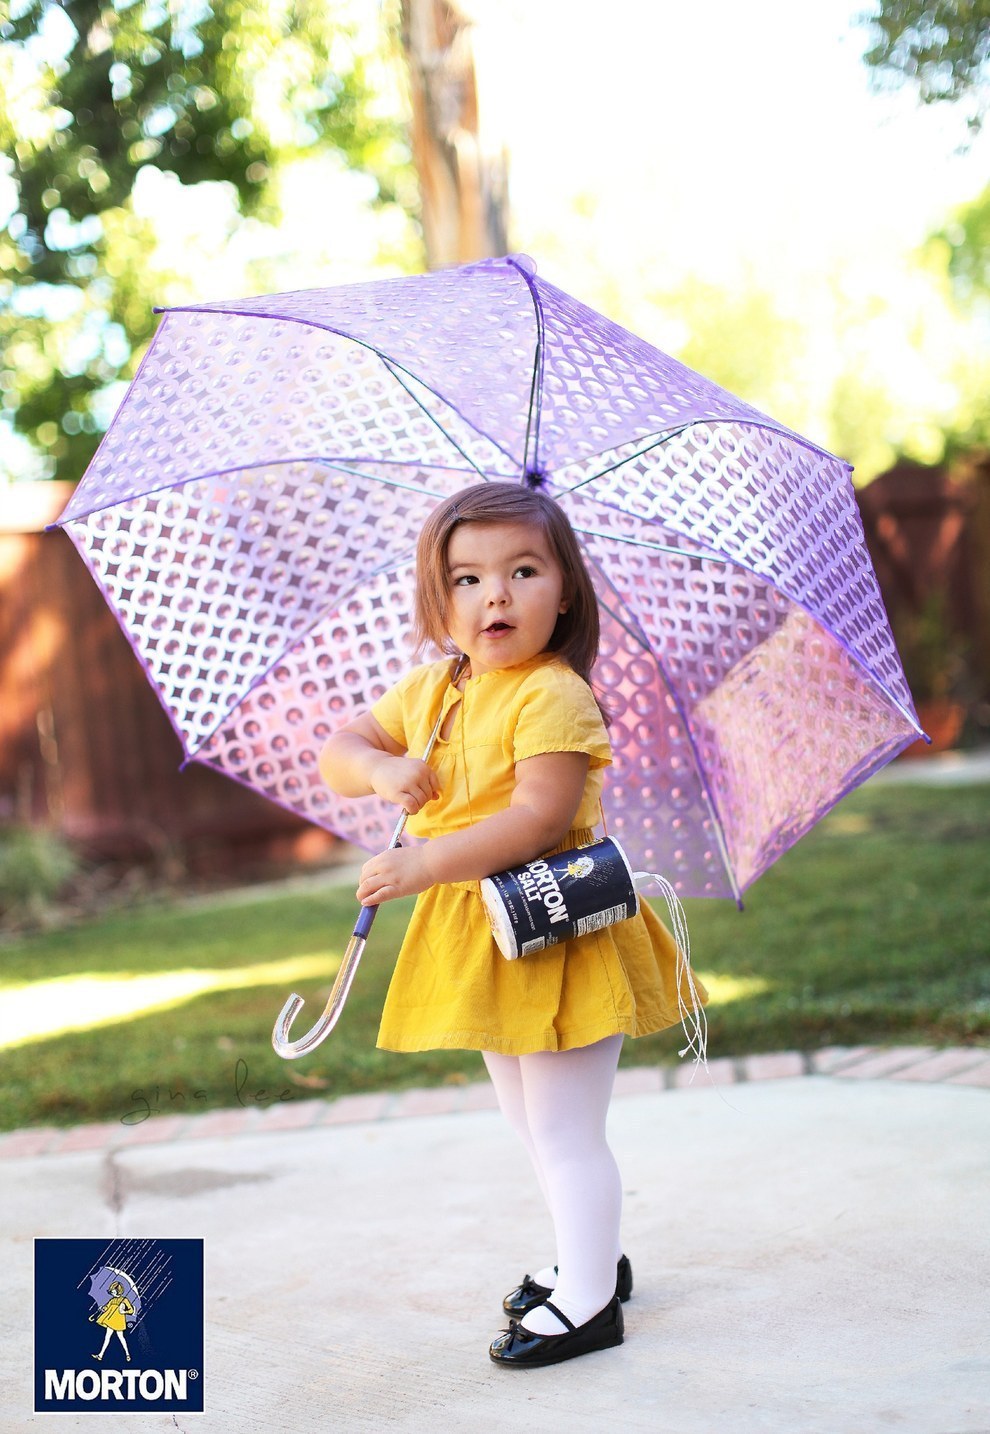 As incredible as those costumes were, Willow somehow topped them last year. She became the Morton Salt Girl...